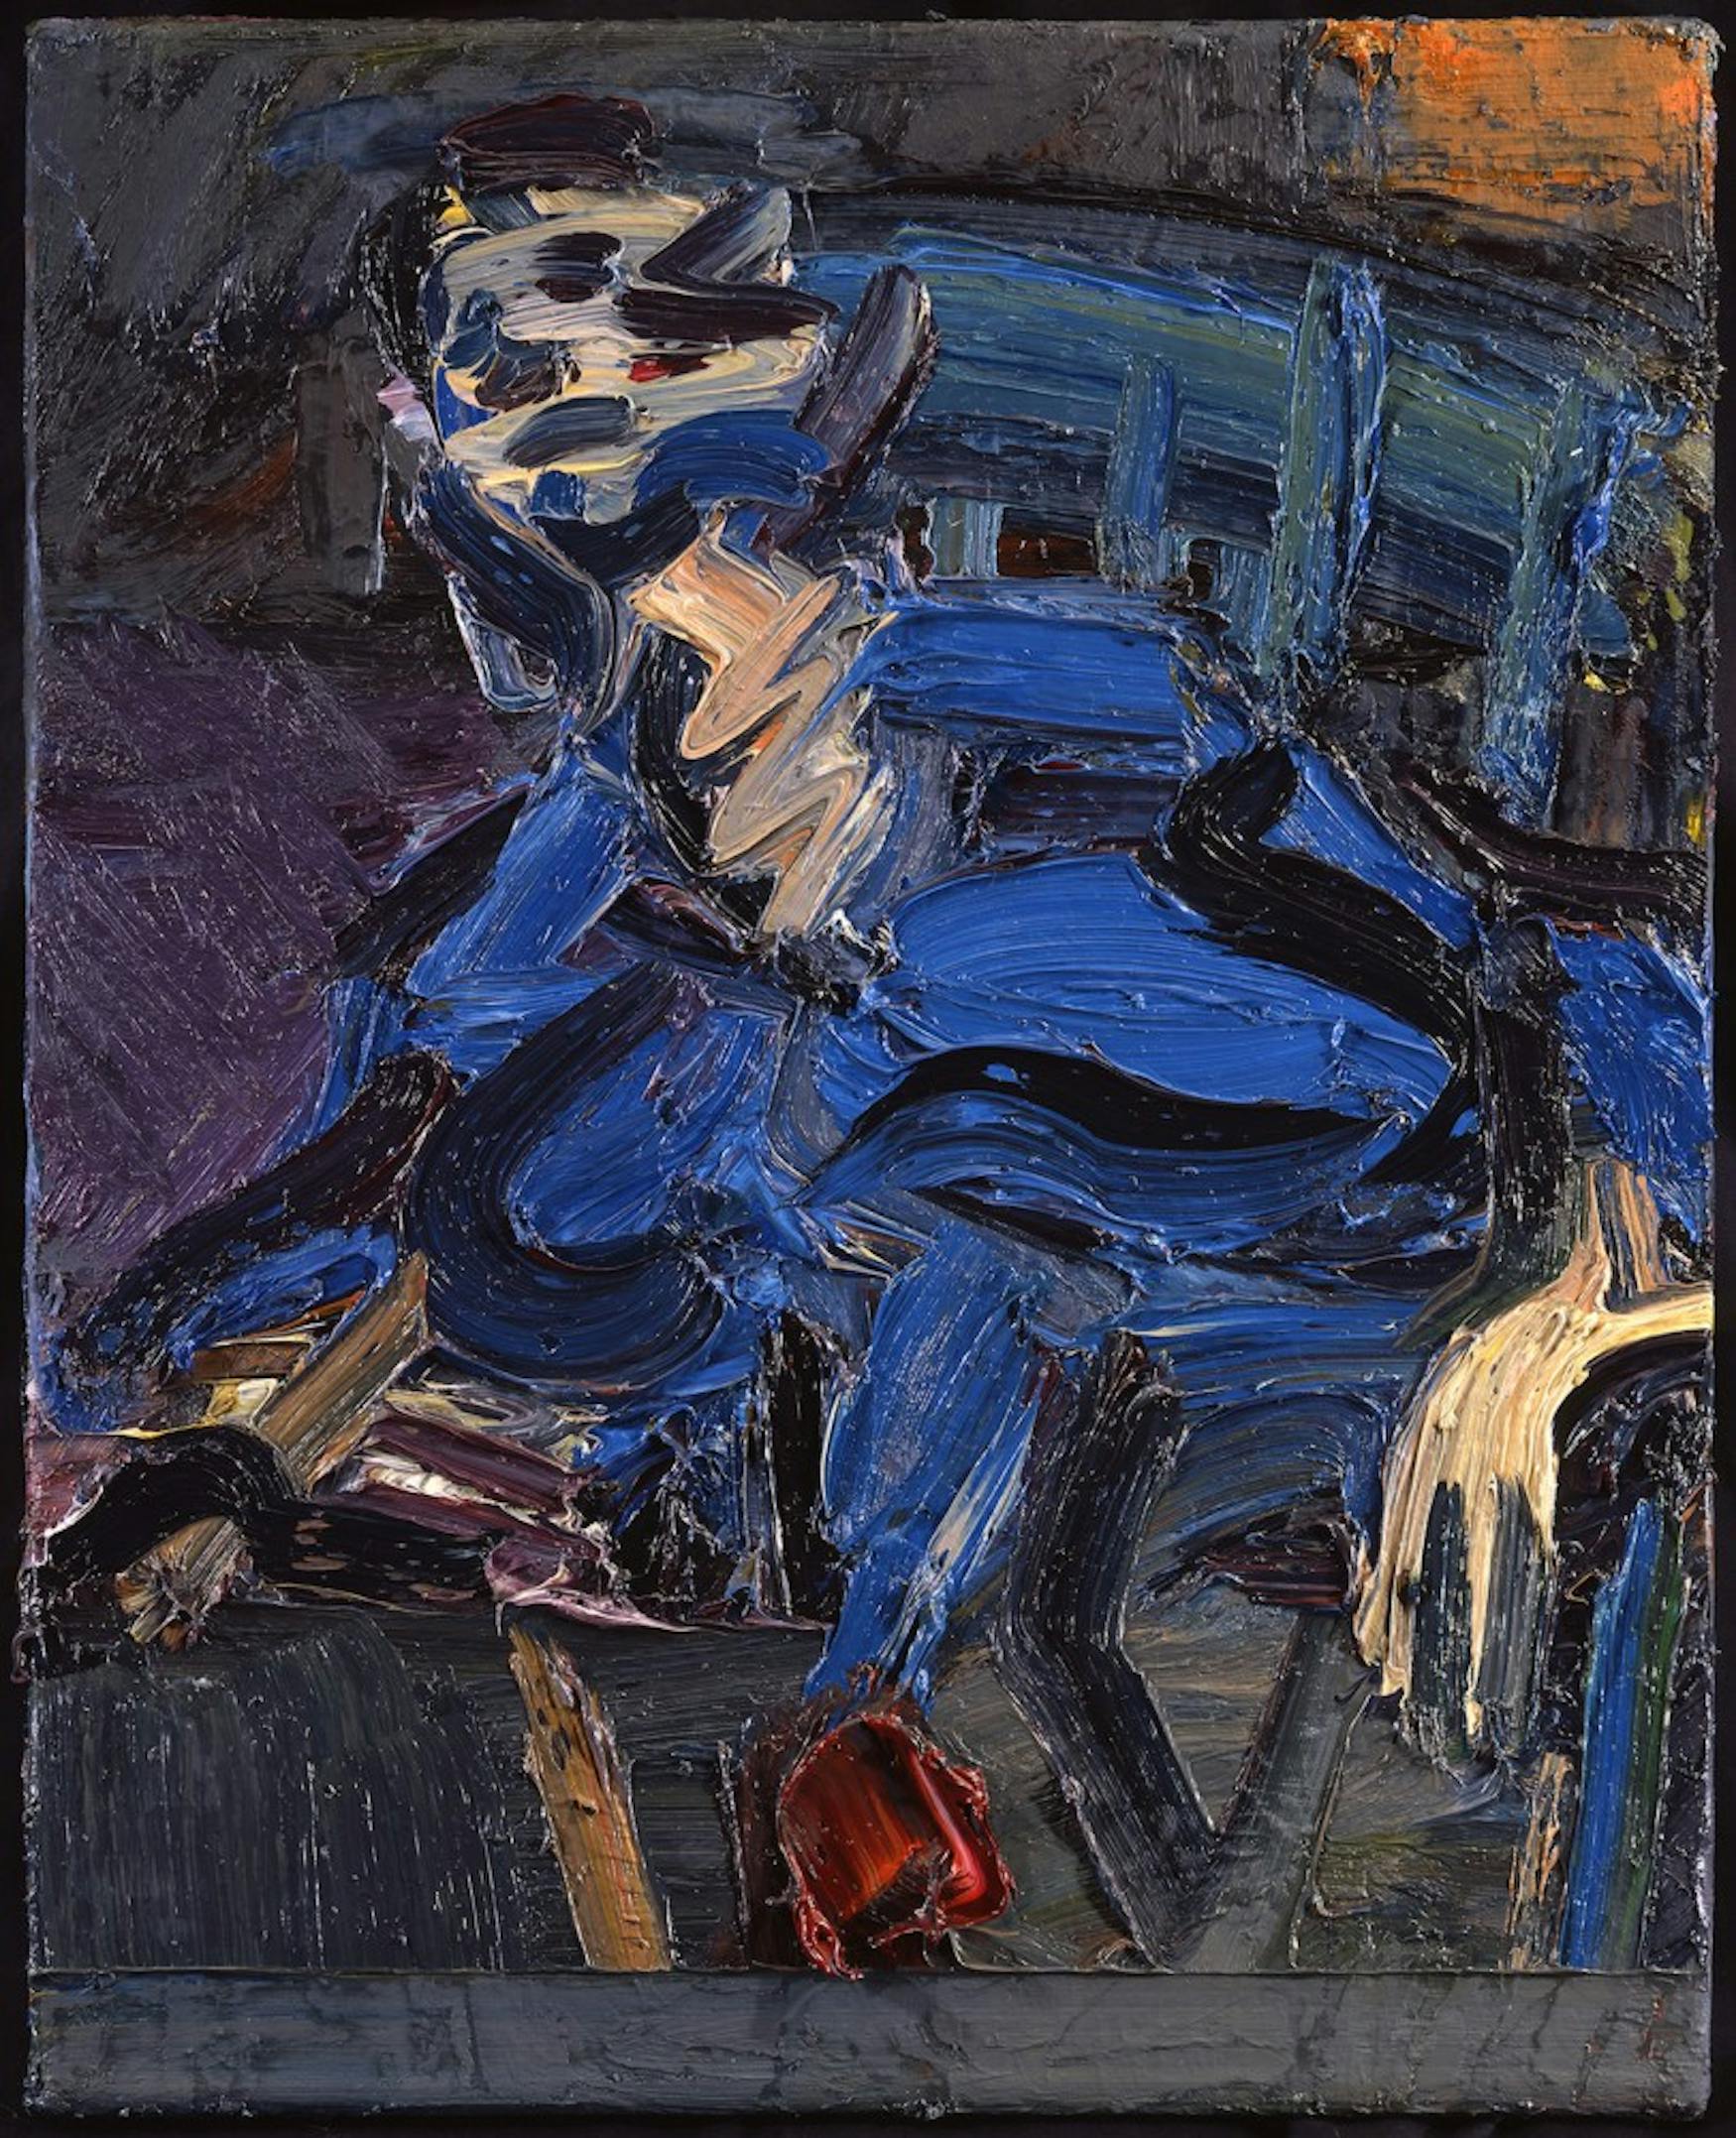 PAINTING BLIND: Frank Auerbach is one of the artists featured in the upcoming Painting Blind exhibit. Featured above is his work from 1987, “J.Y.M. Seated.”